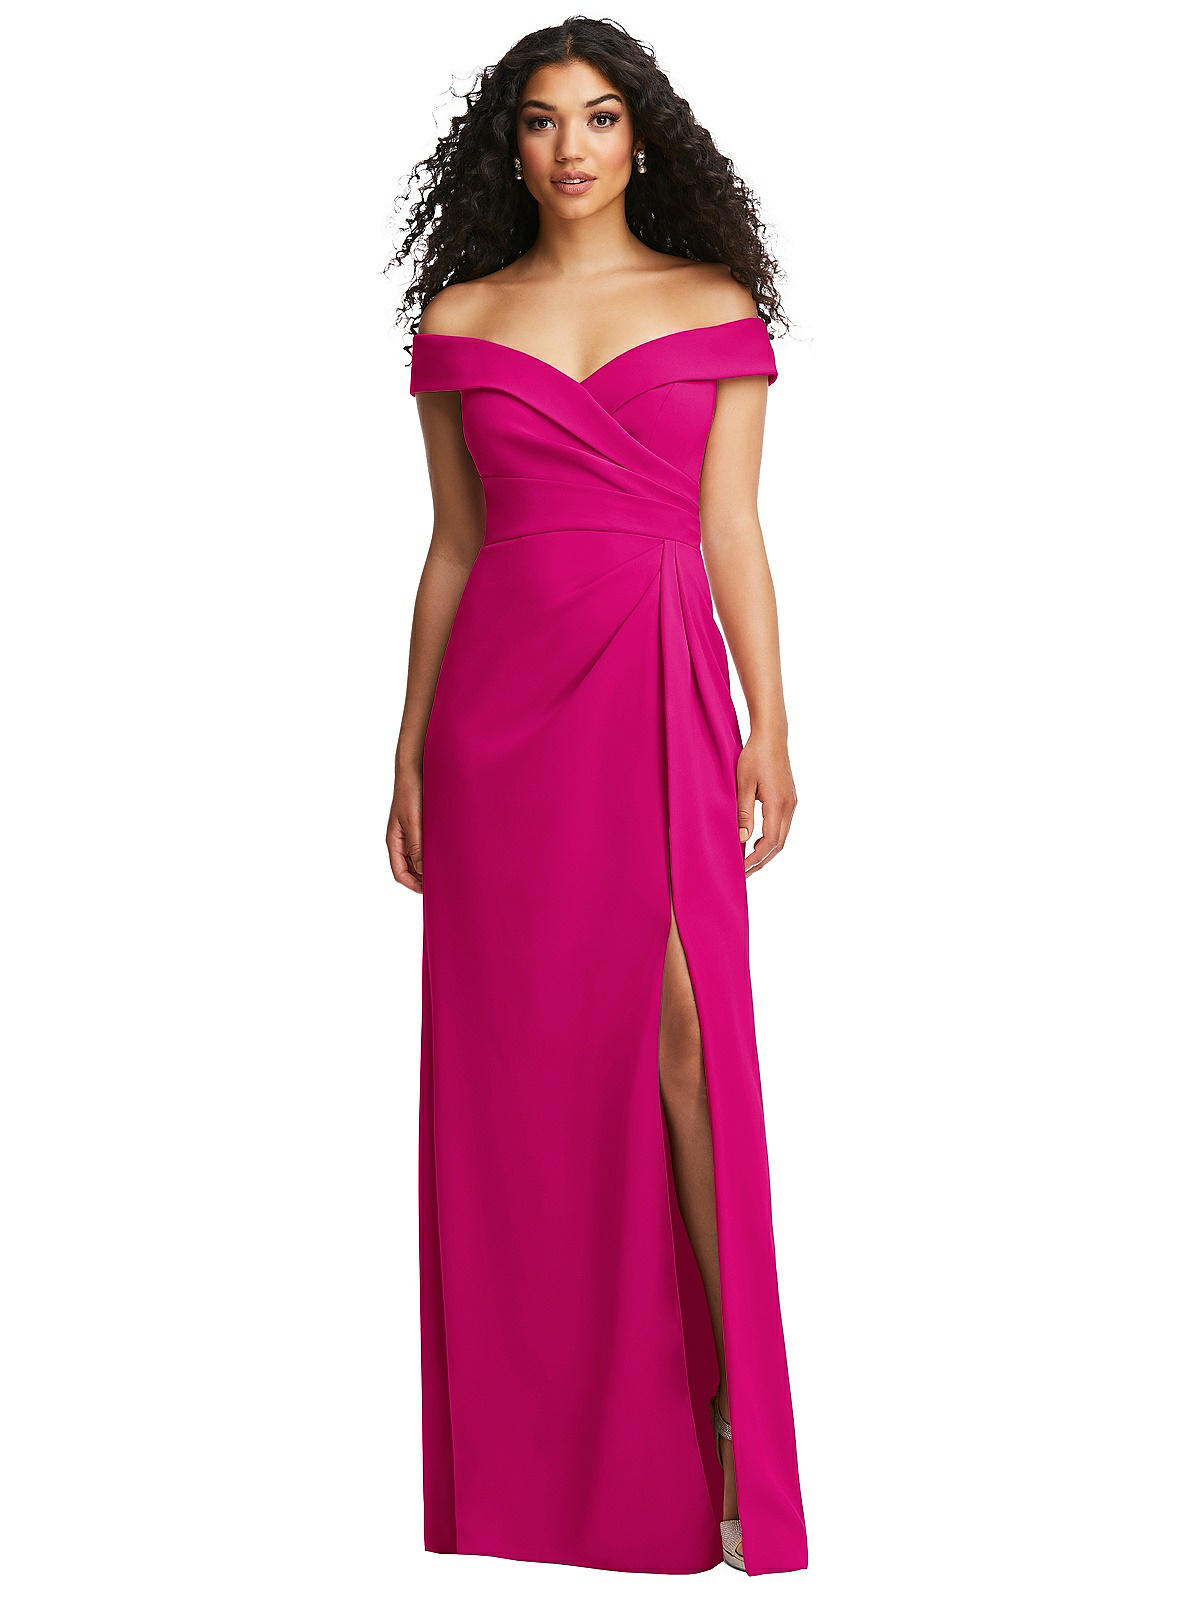 Cuffed Off-the-shoulder Pleated Faux Wrap Maxi Bridesmaid